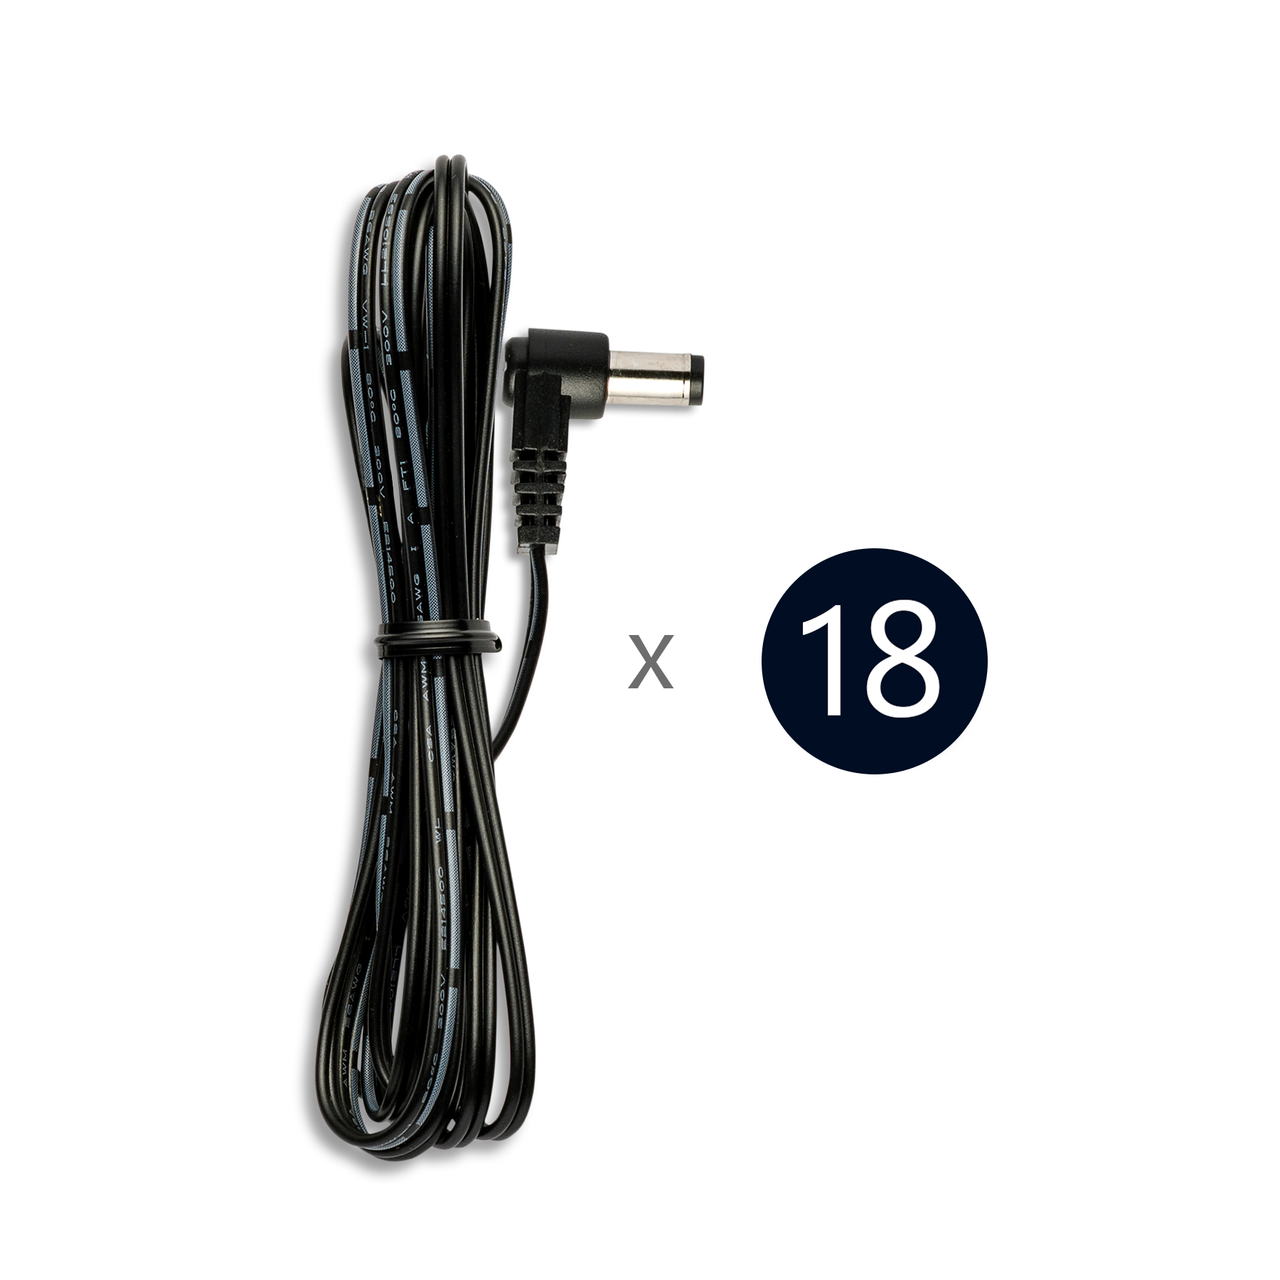 18 x DC Leads included